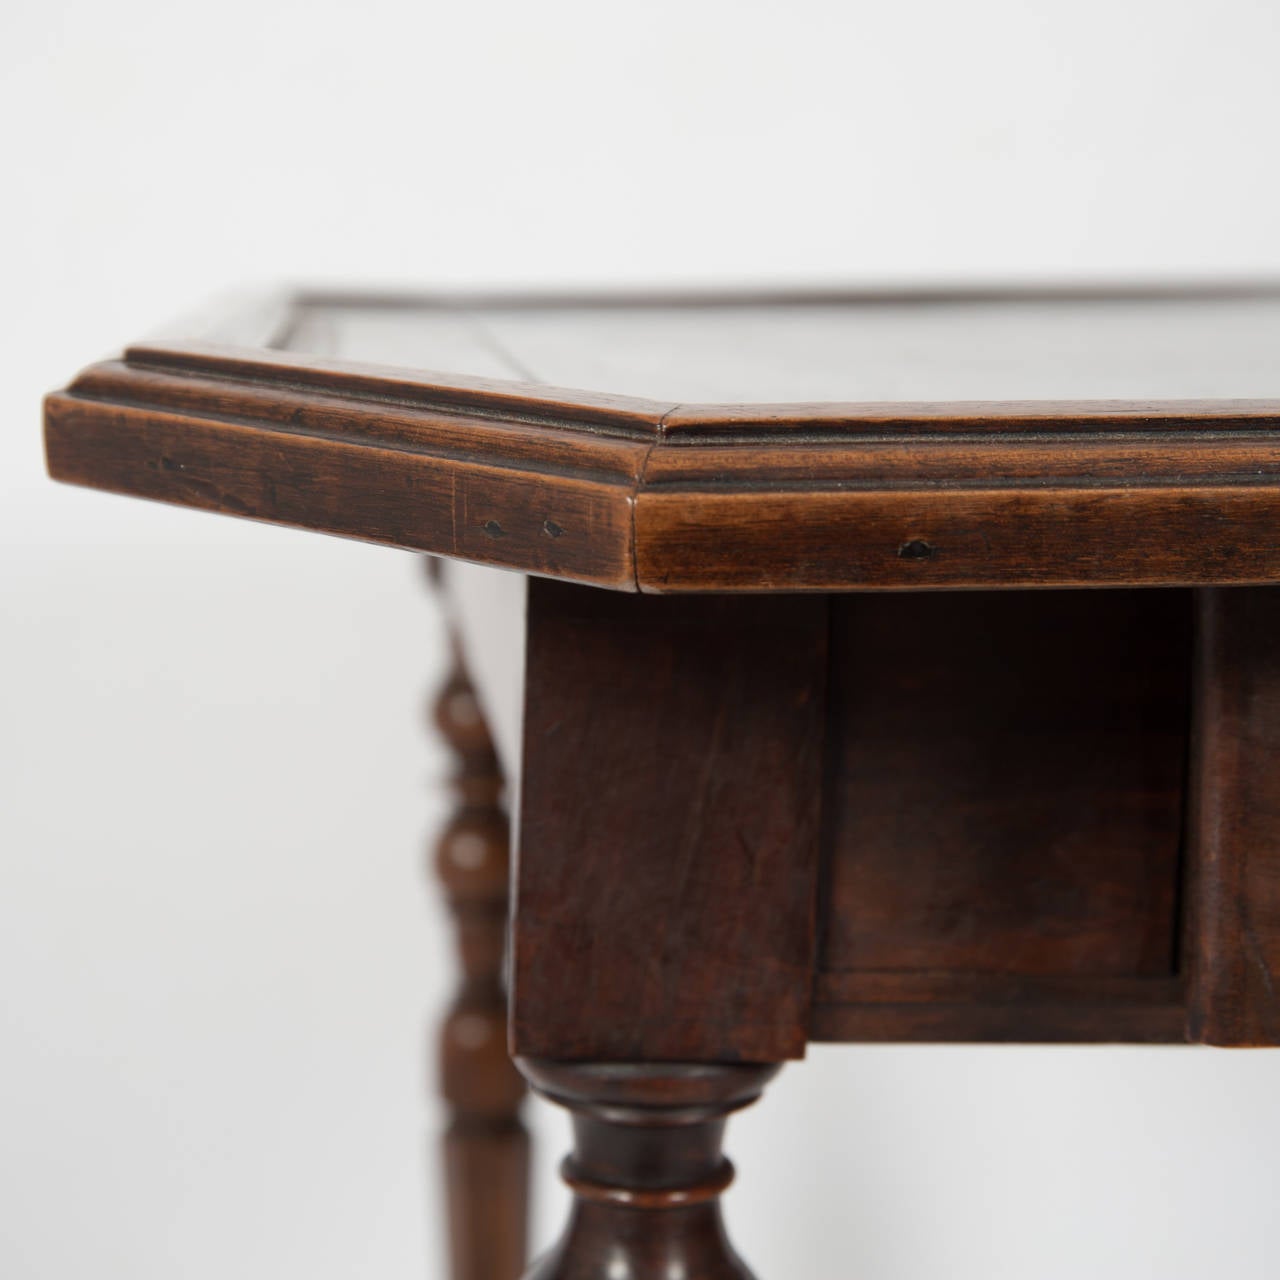 Superbly Patinated French Walnut Side Table circa 1800 with Tooled Leather Top For Sale 5